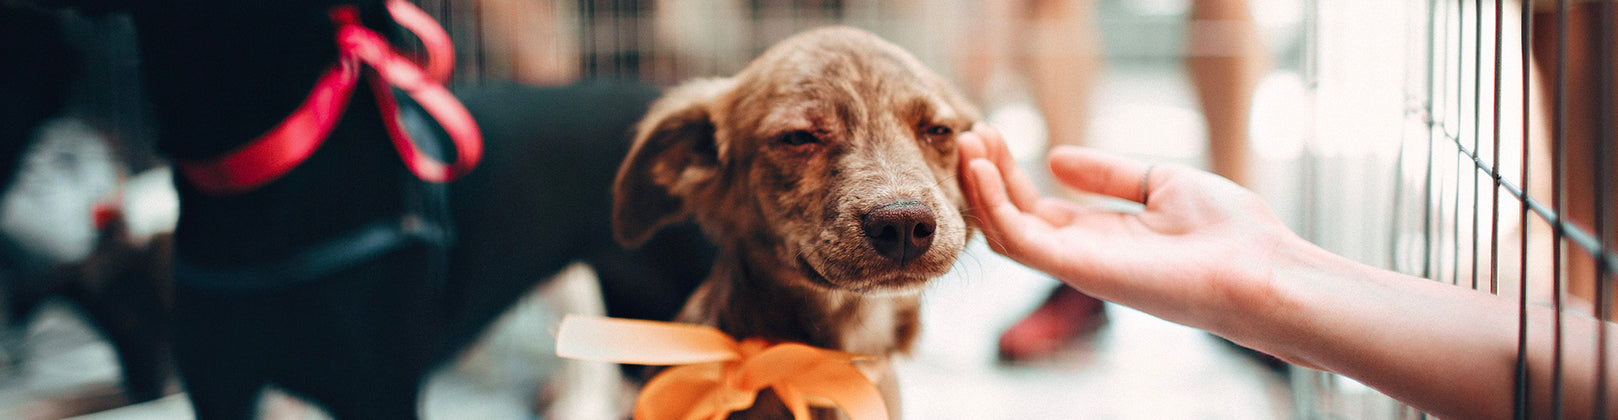 A Helping Paw: 3 Tips for Helping Animals in Need